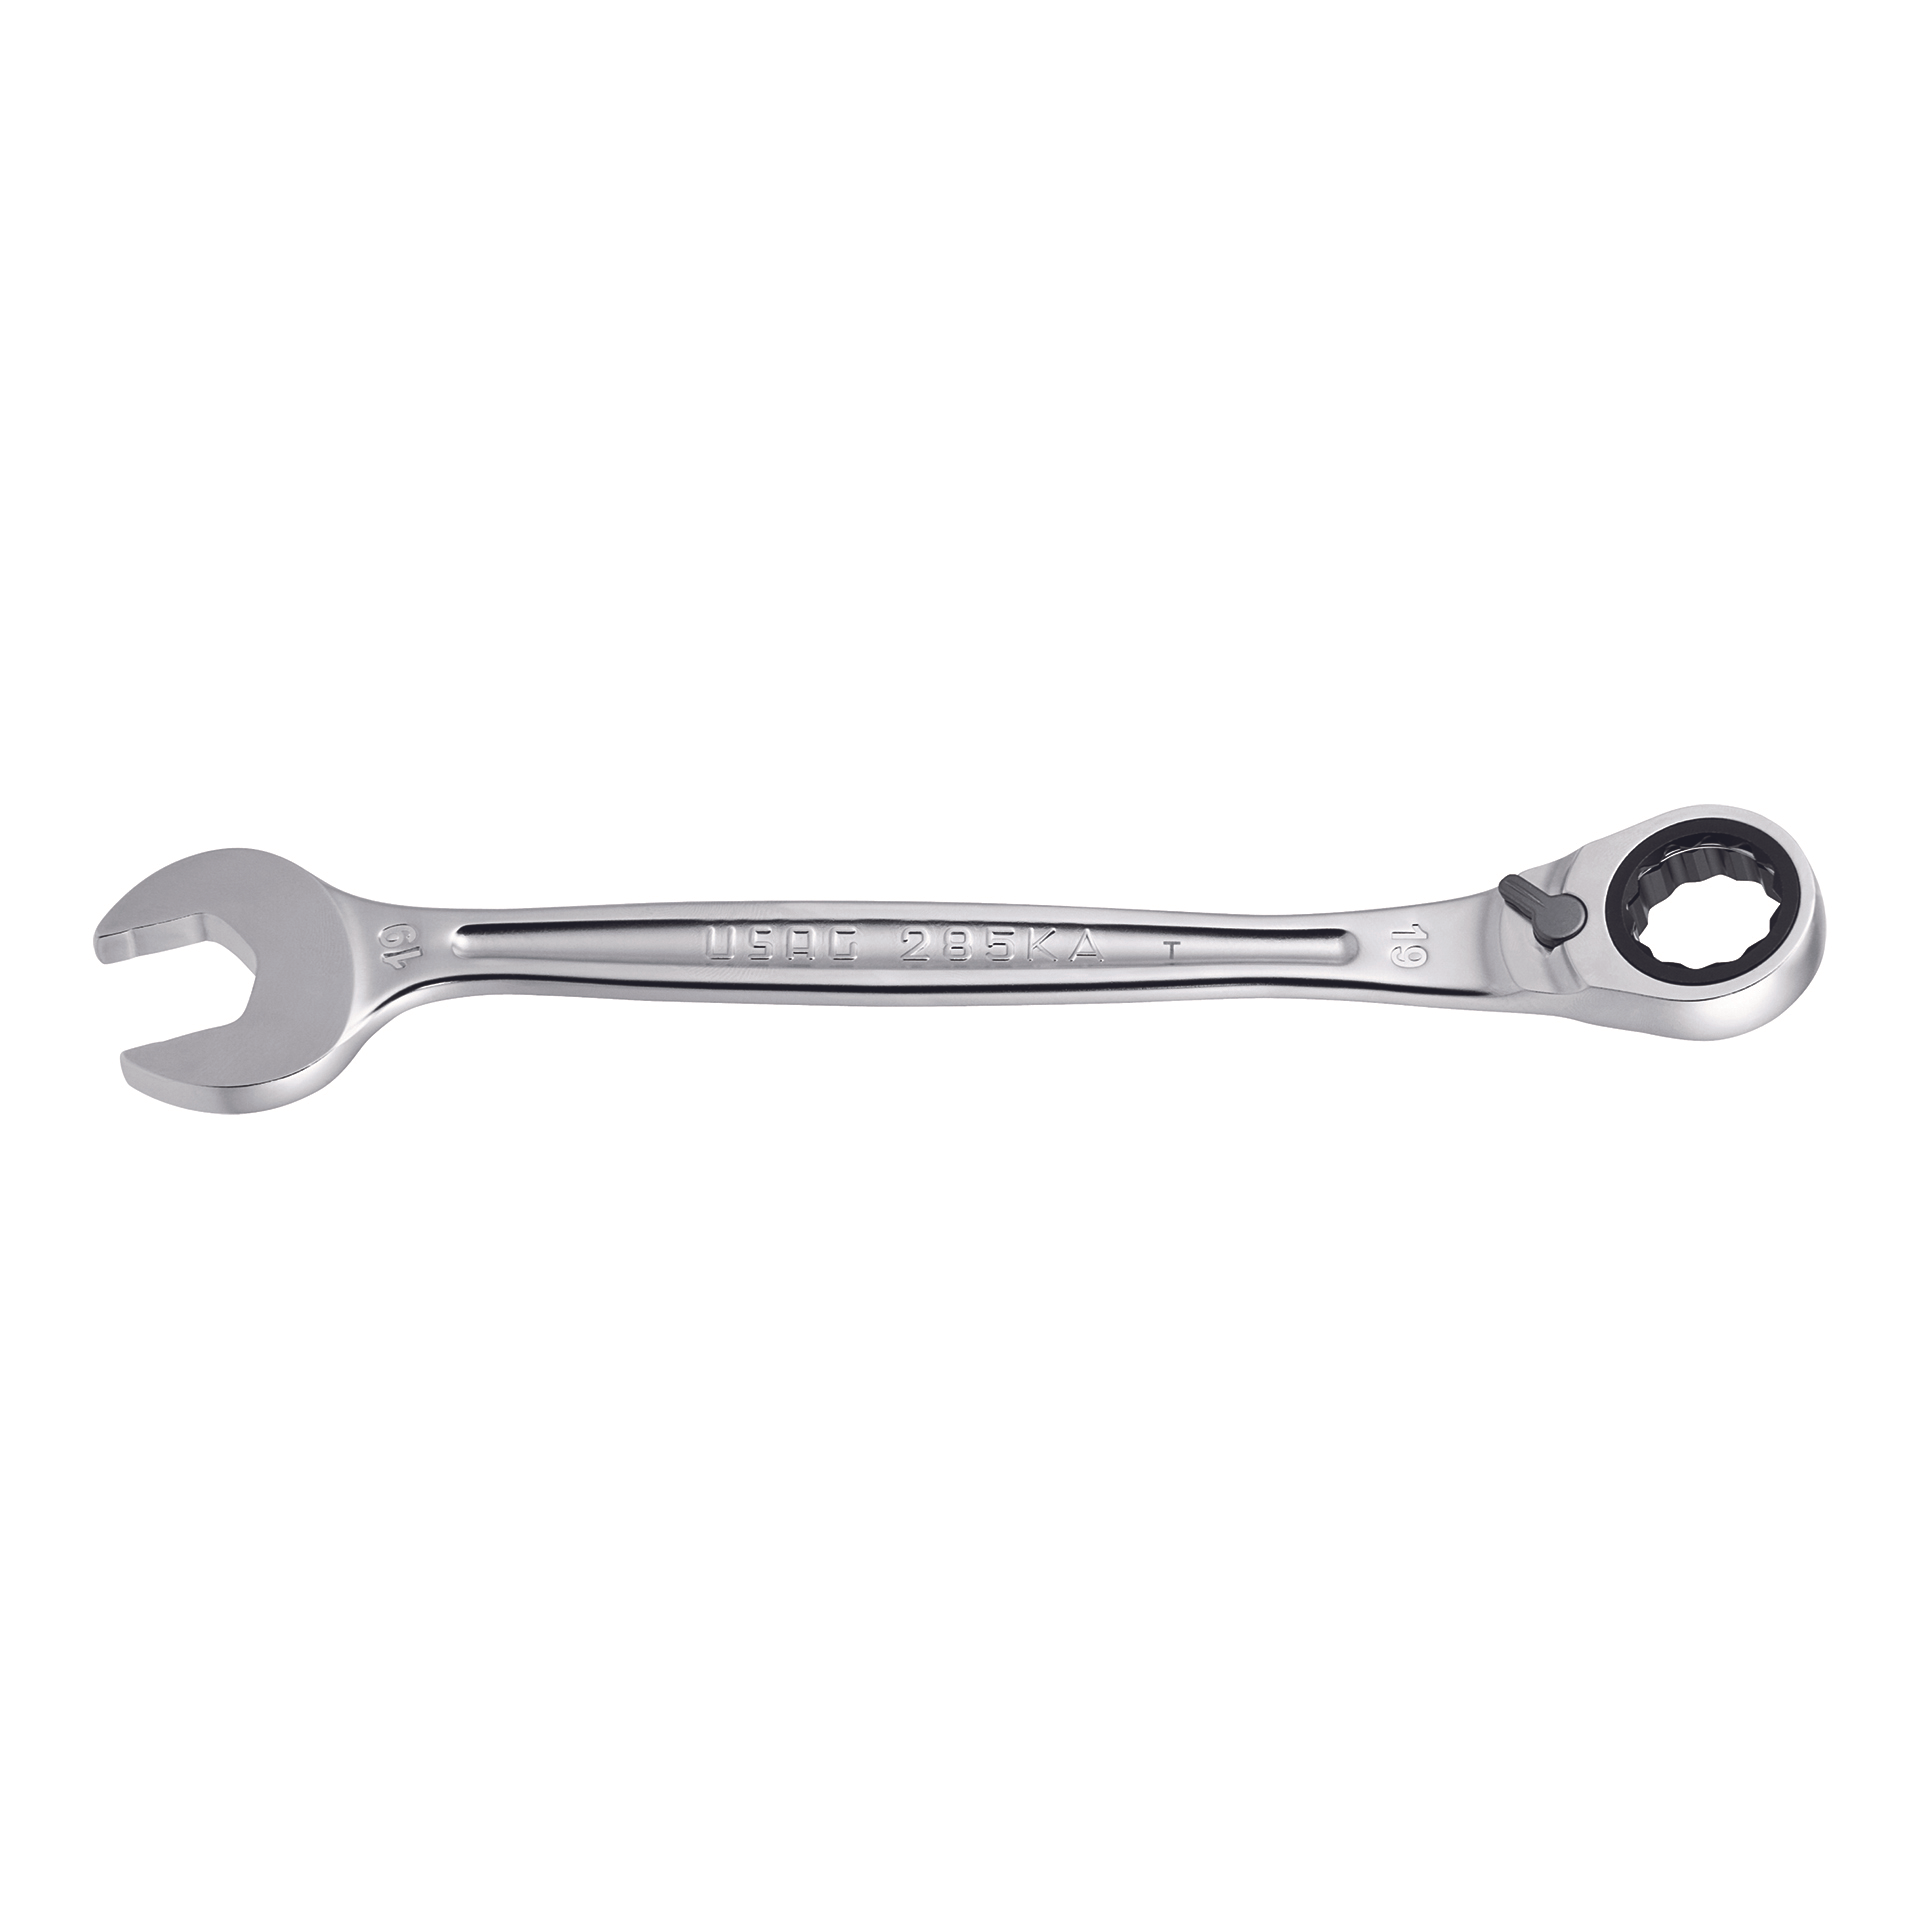 Ratchet combination spanner with retaining ring - Usag 285 KA